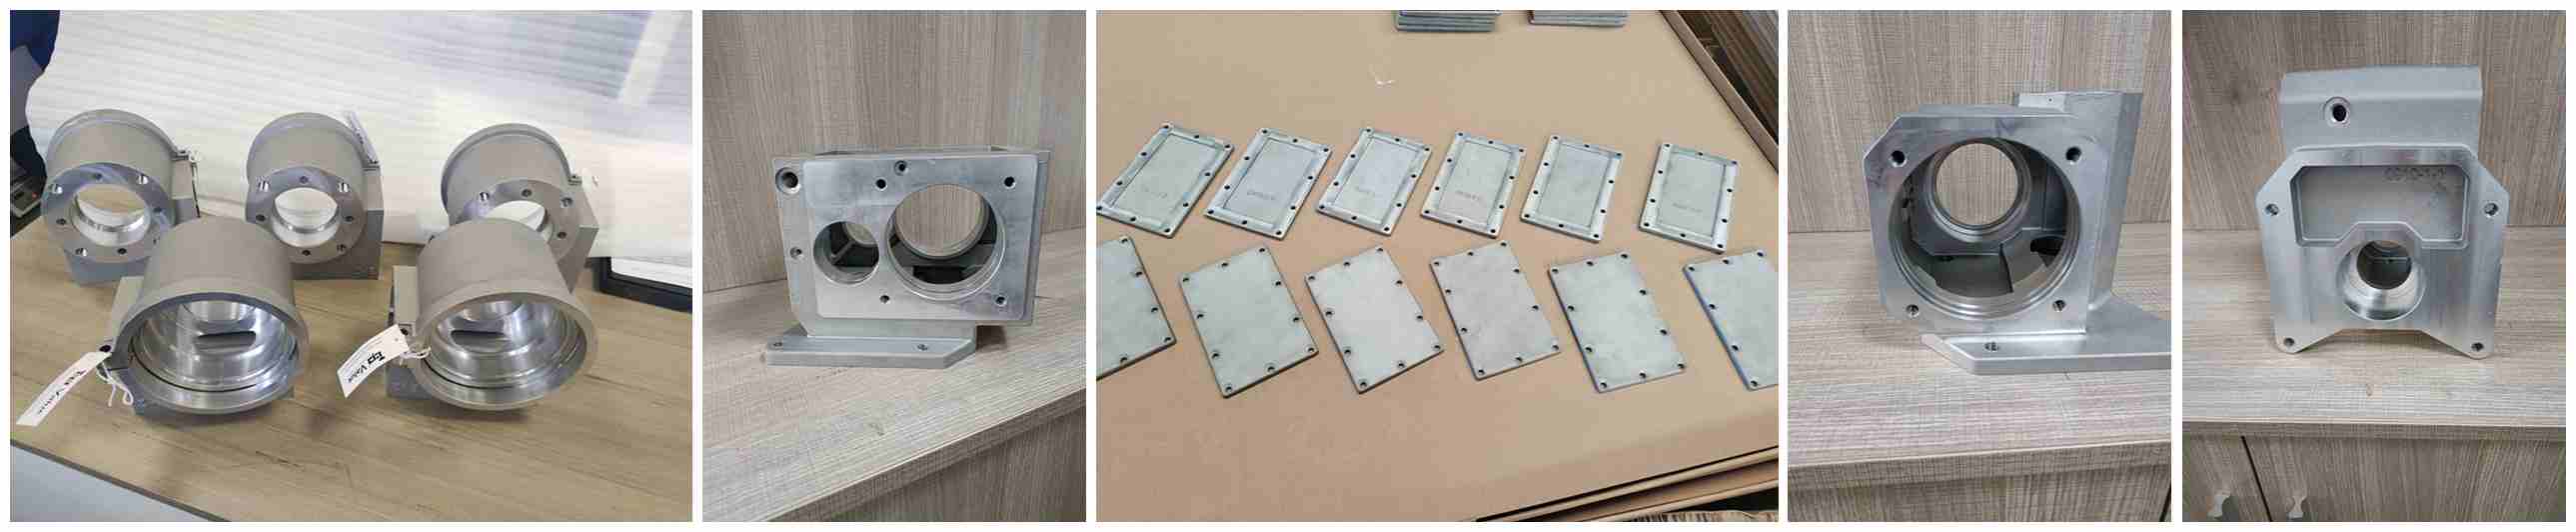 New Aluminum Casting Samples Finished(图1)